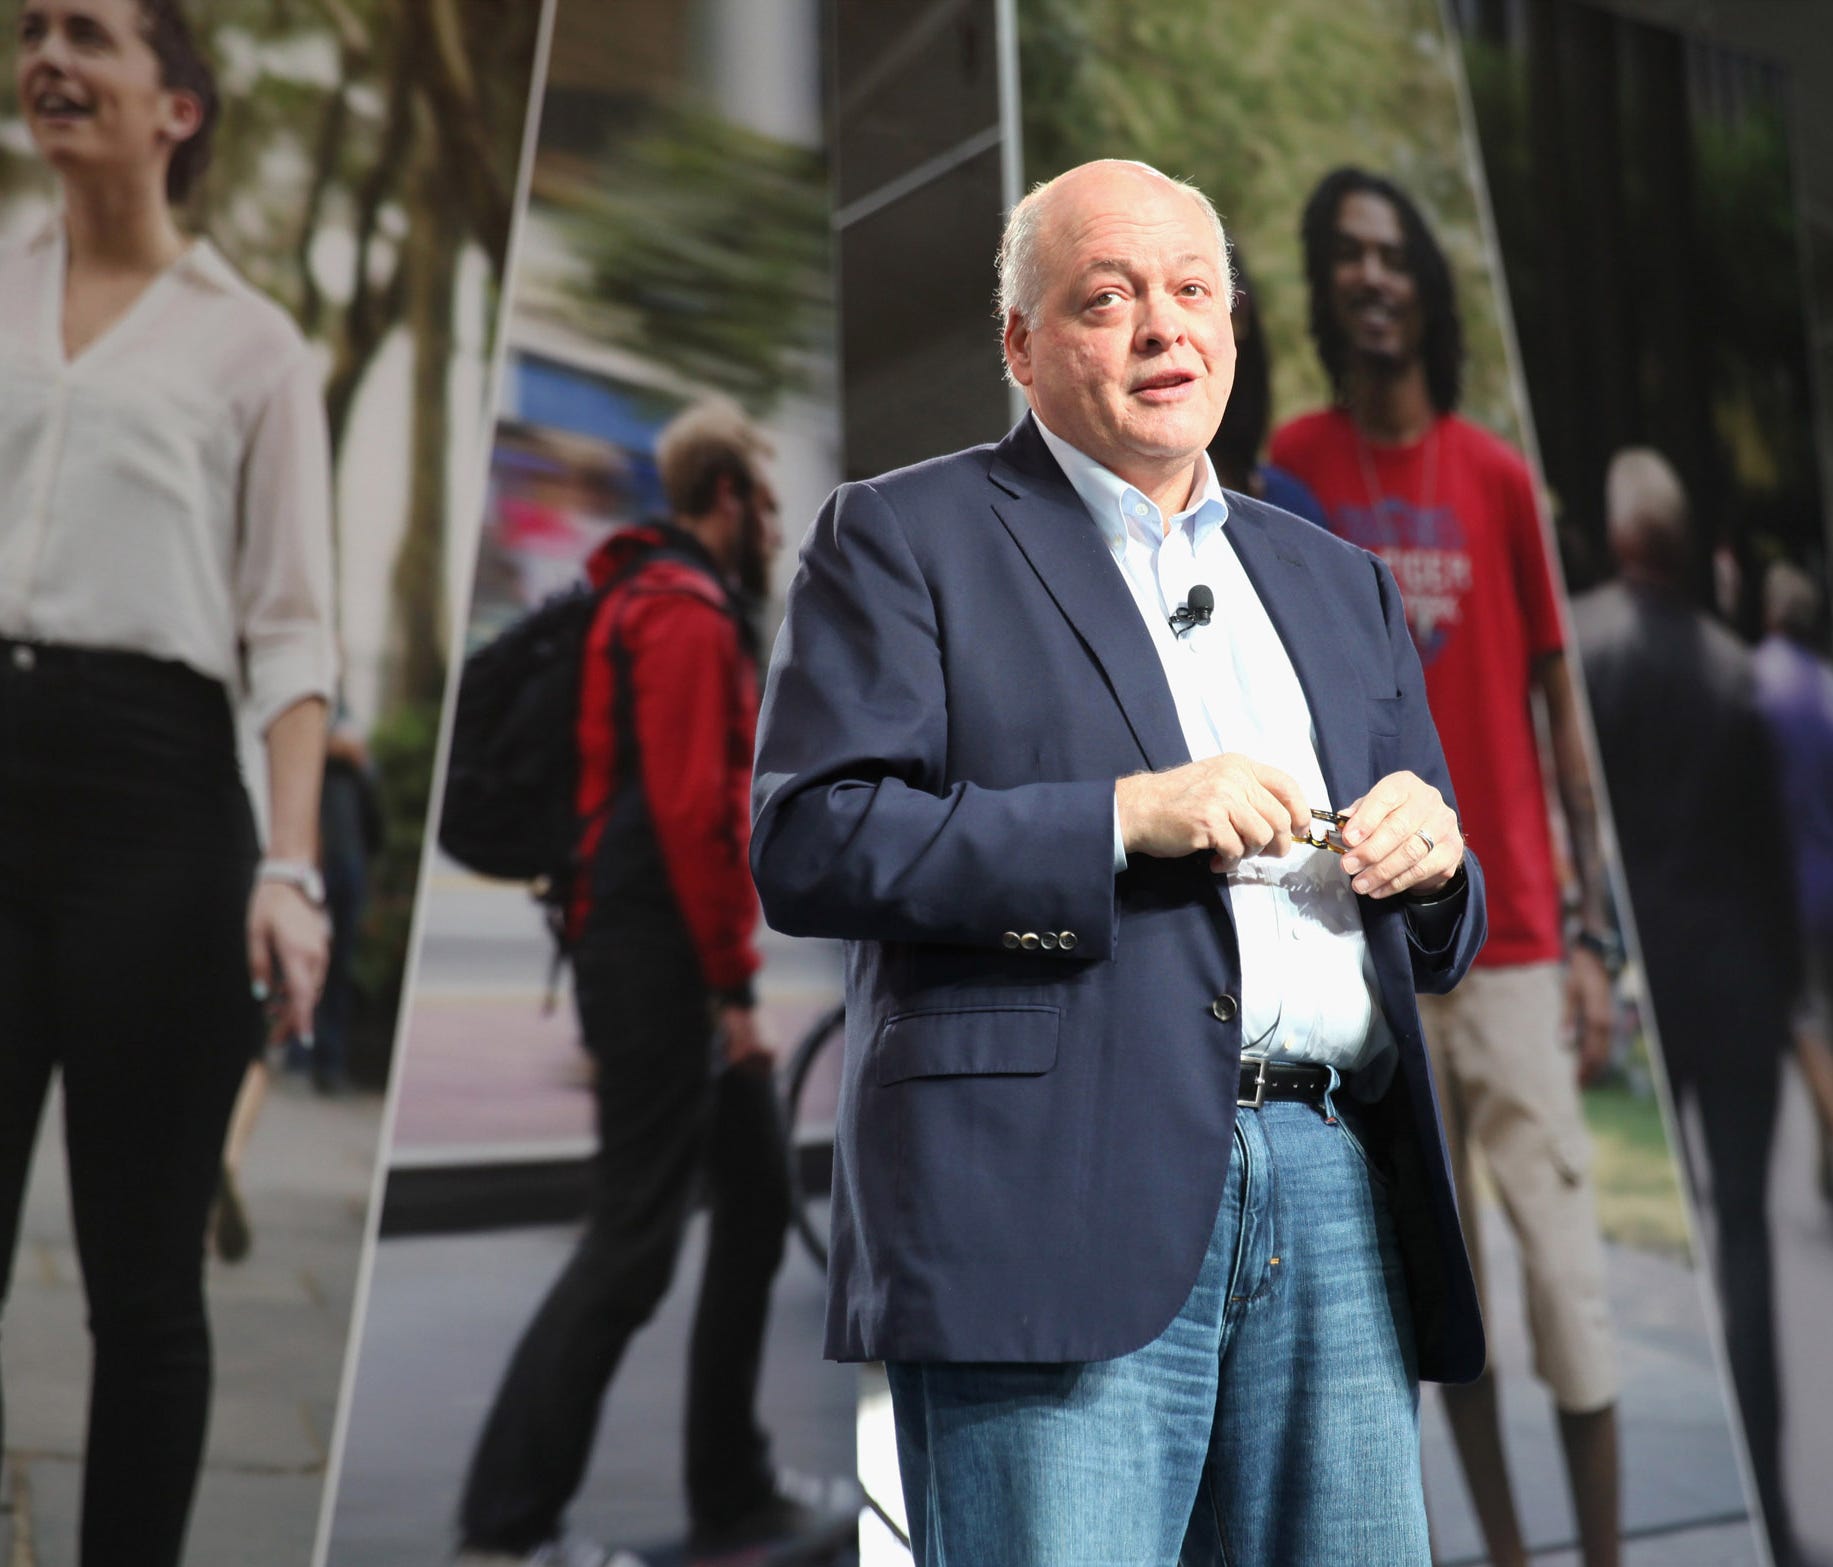 Jim Hackett, President & CEO of Ford Motor Company, speaks on stage during City of Tomorrow Symposium presented by Ford Motor Company in August 2017 in San Francisco, CA